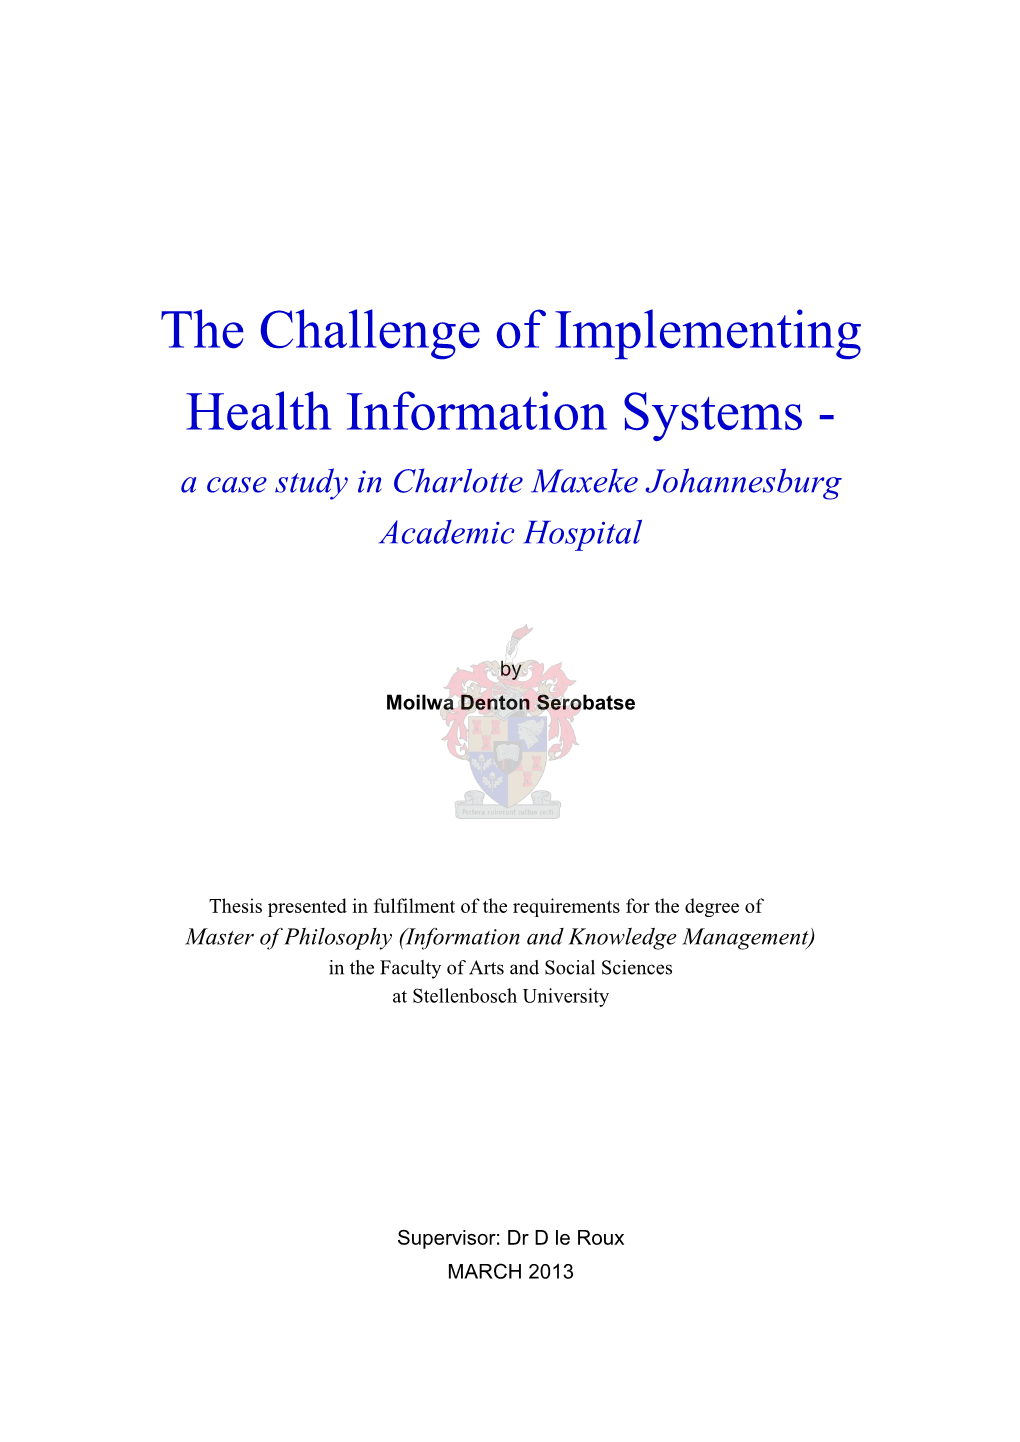 The Challenge of Implementing Health Information Systems - a Case Study in Charlotte Maxeke Johannesburg Academic Hospital